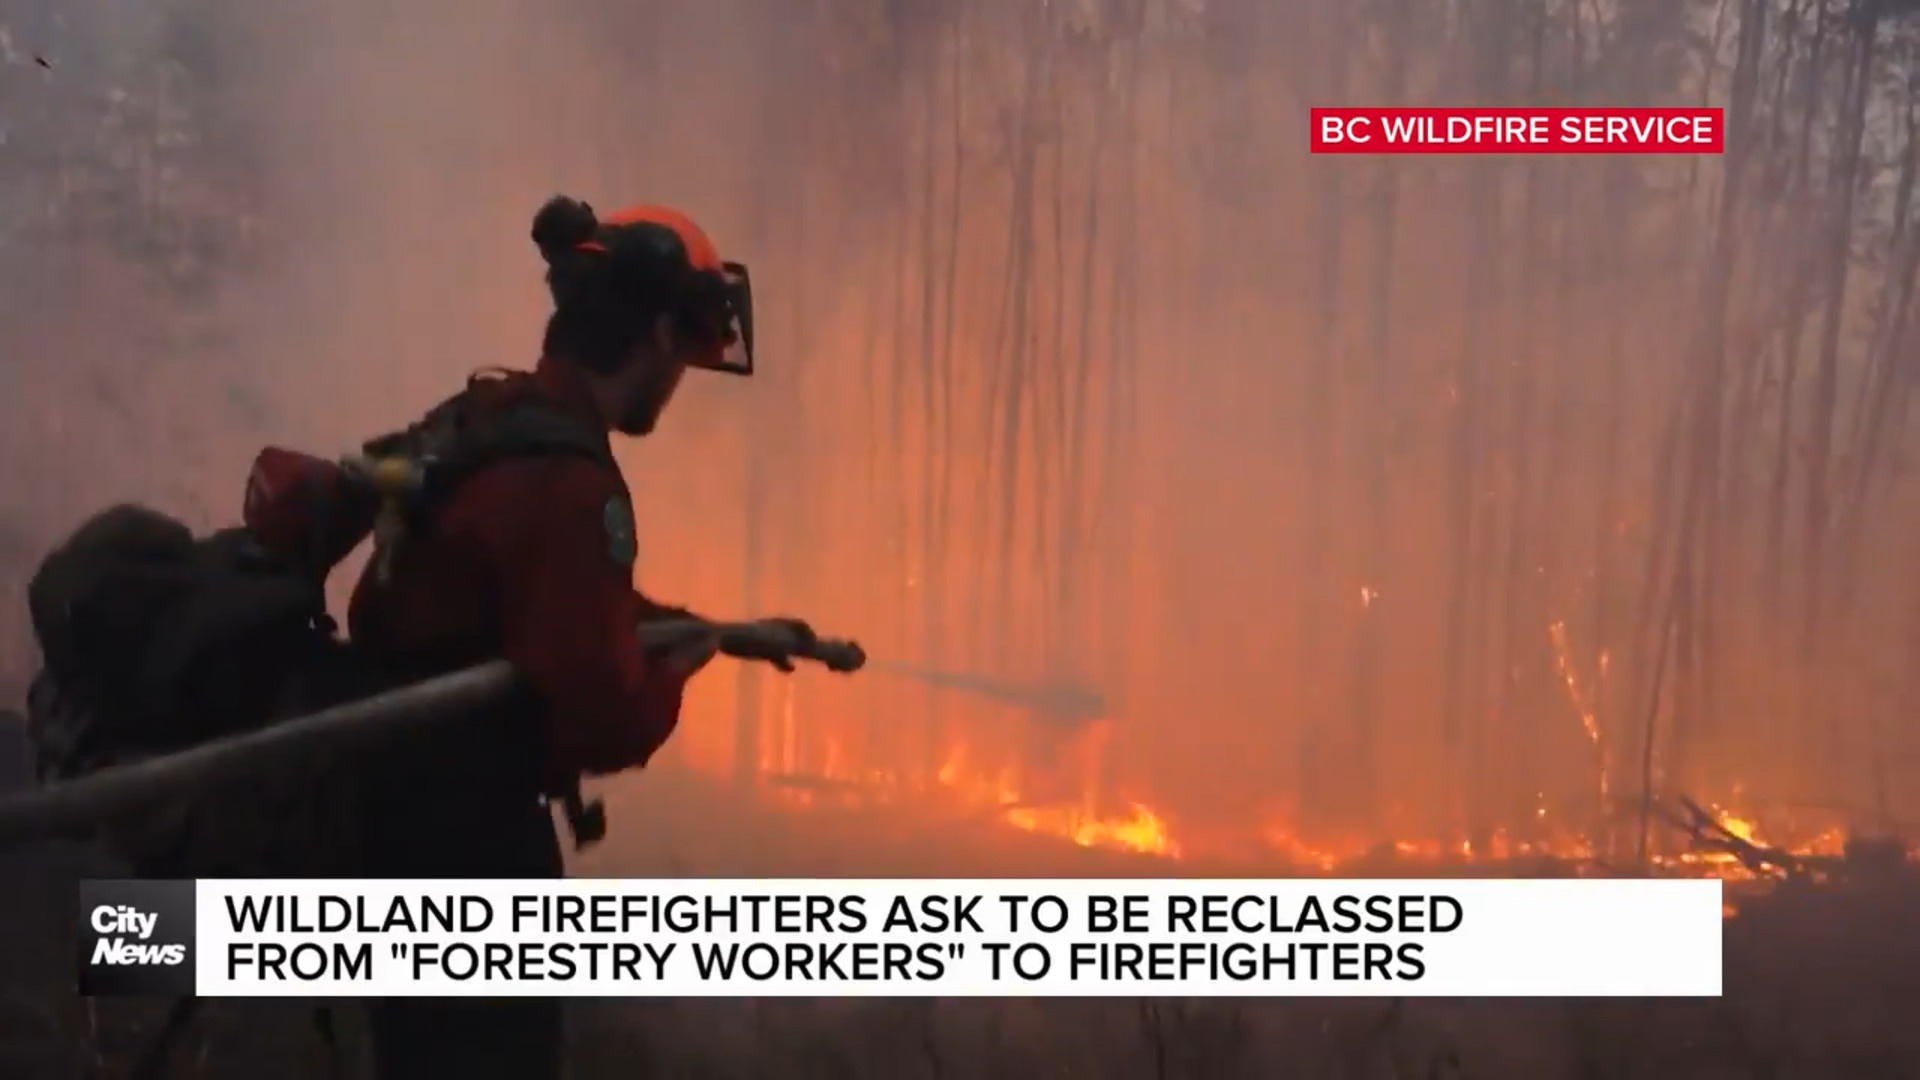 The firefighters not considered “firefighters”